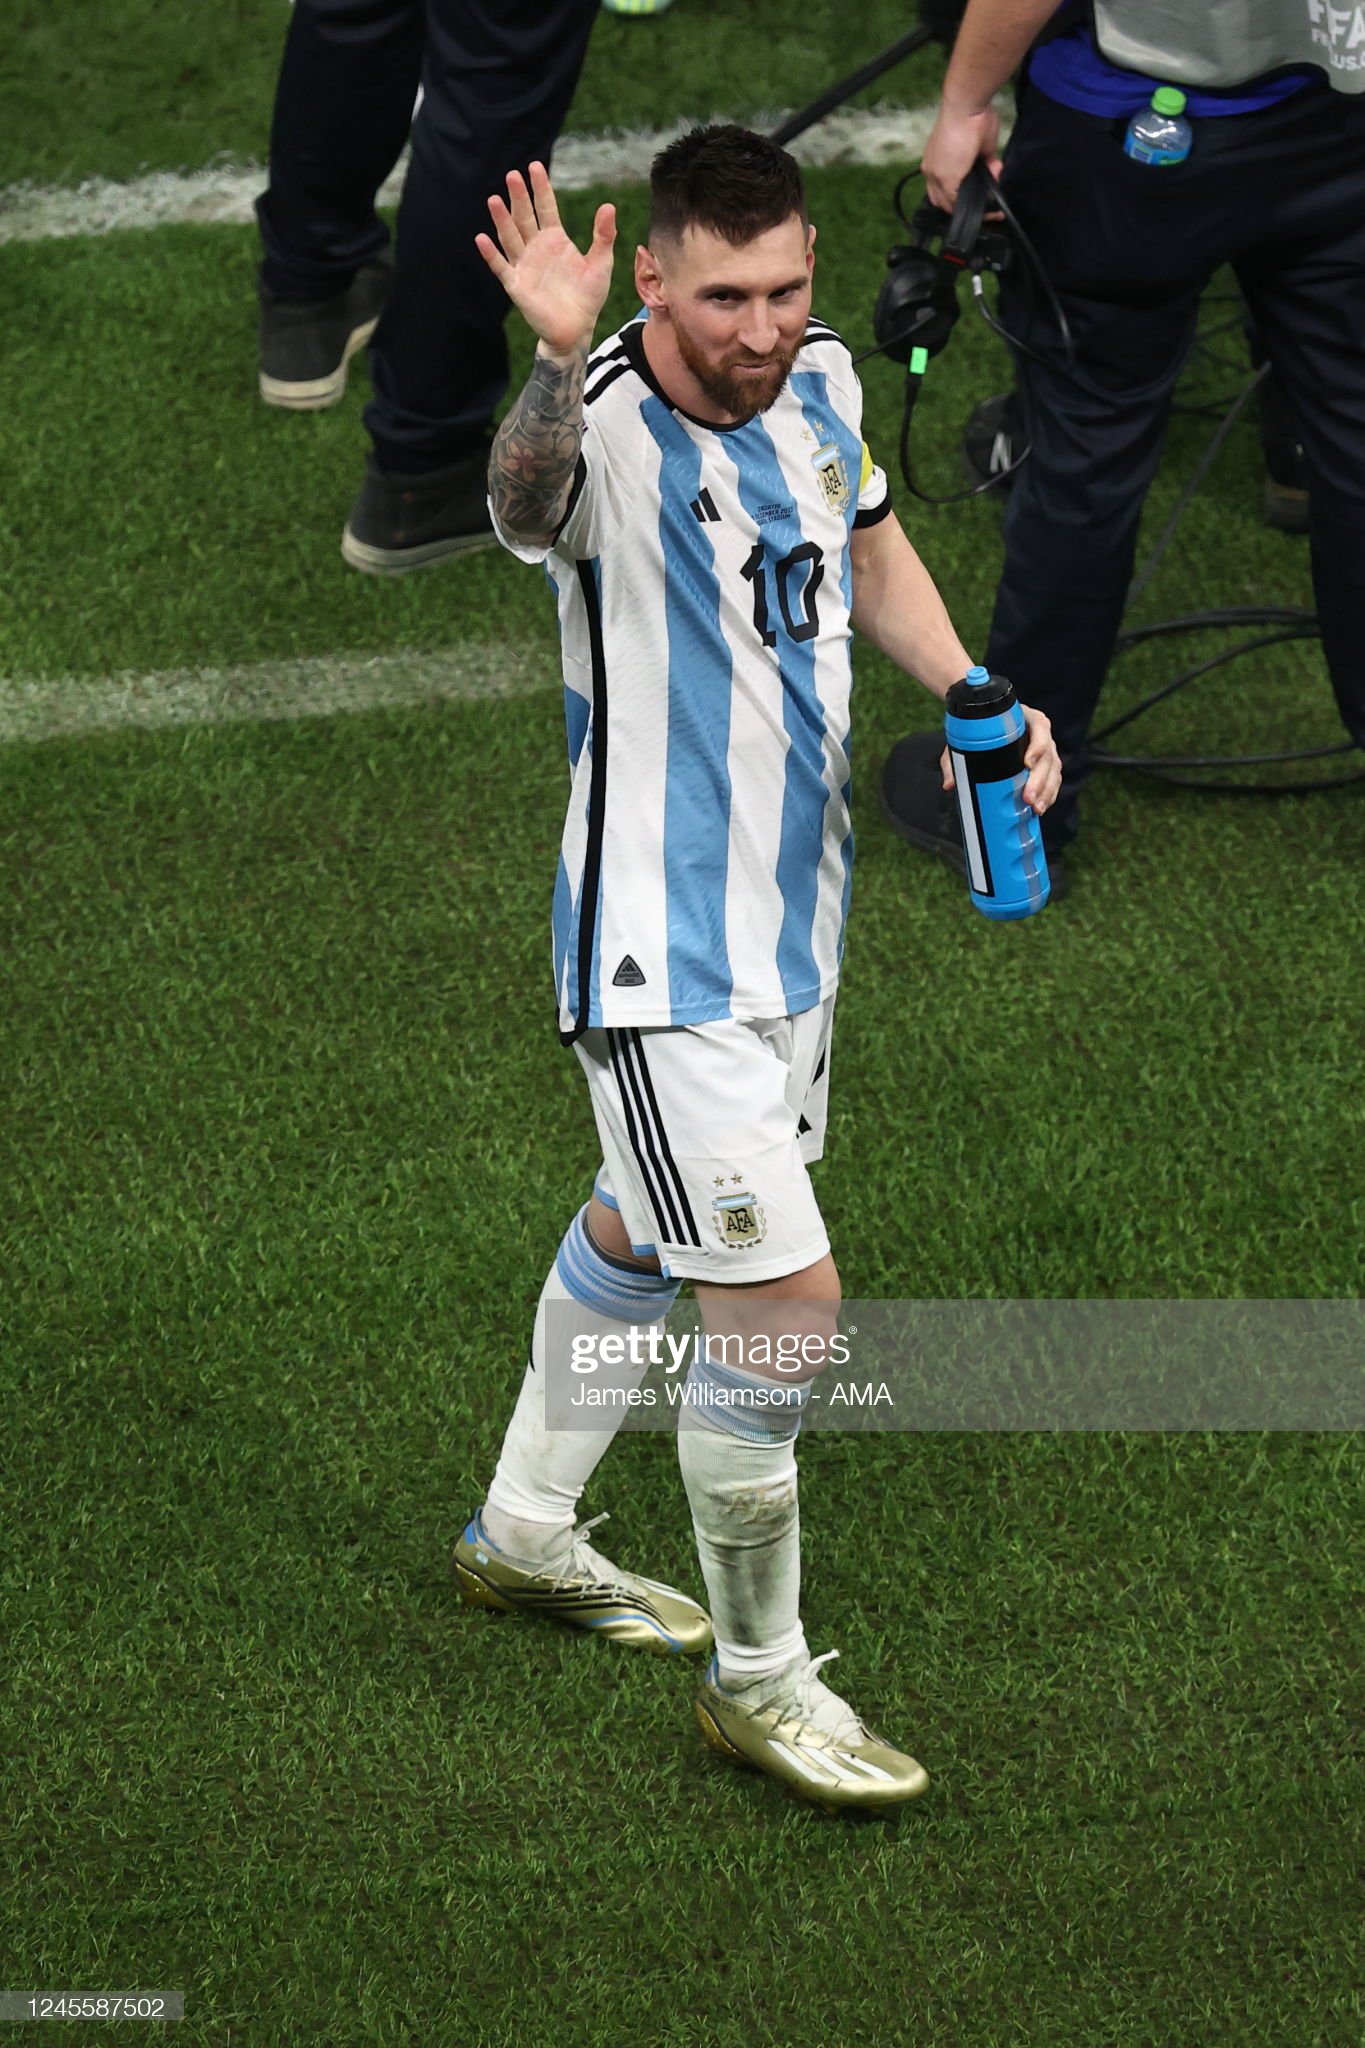 gettyimages 1245587502 2048x2048 1 HOW Lionel Messi's Fantasy alive as Julian Alvarez lifts Argentina into definite in FIFA World Cup 2022, WATCH